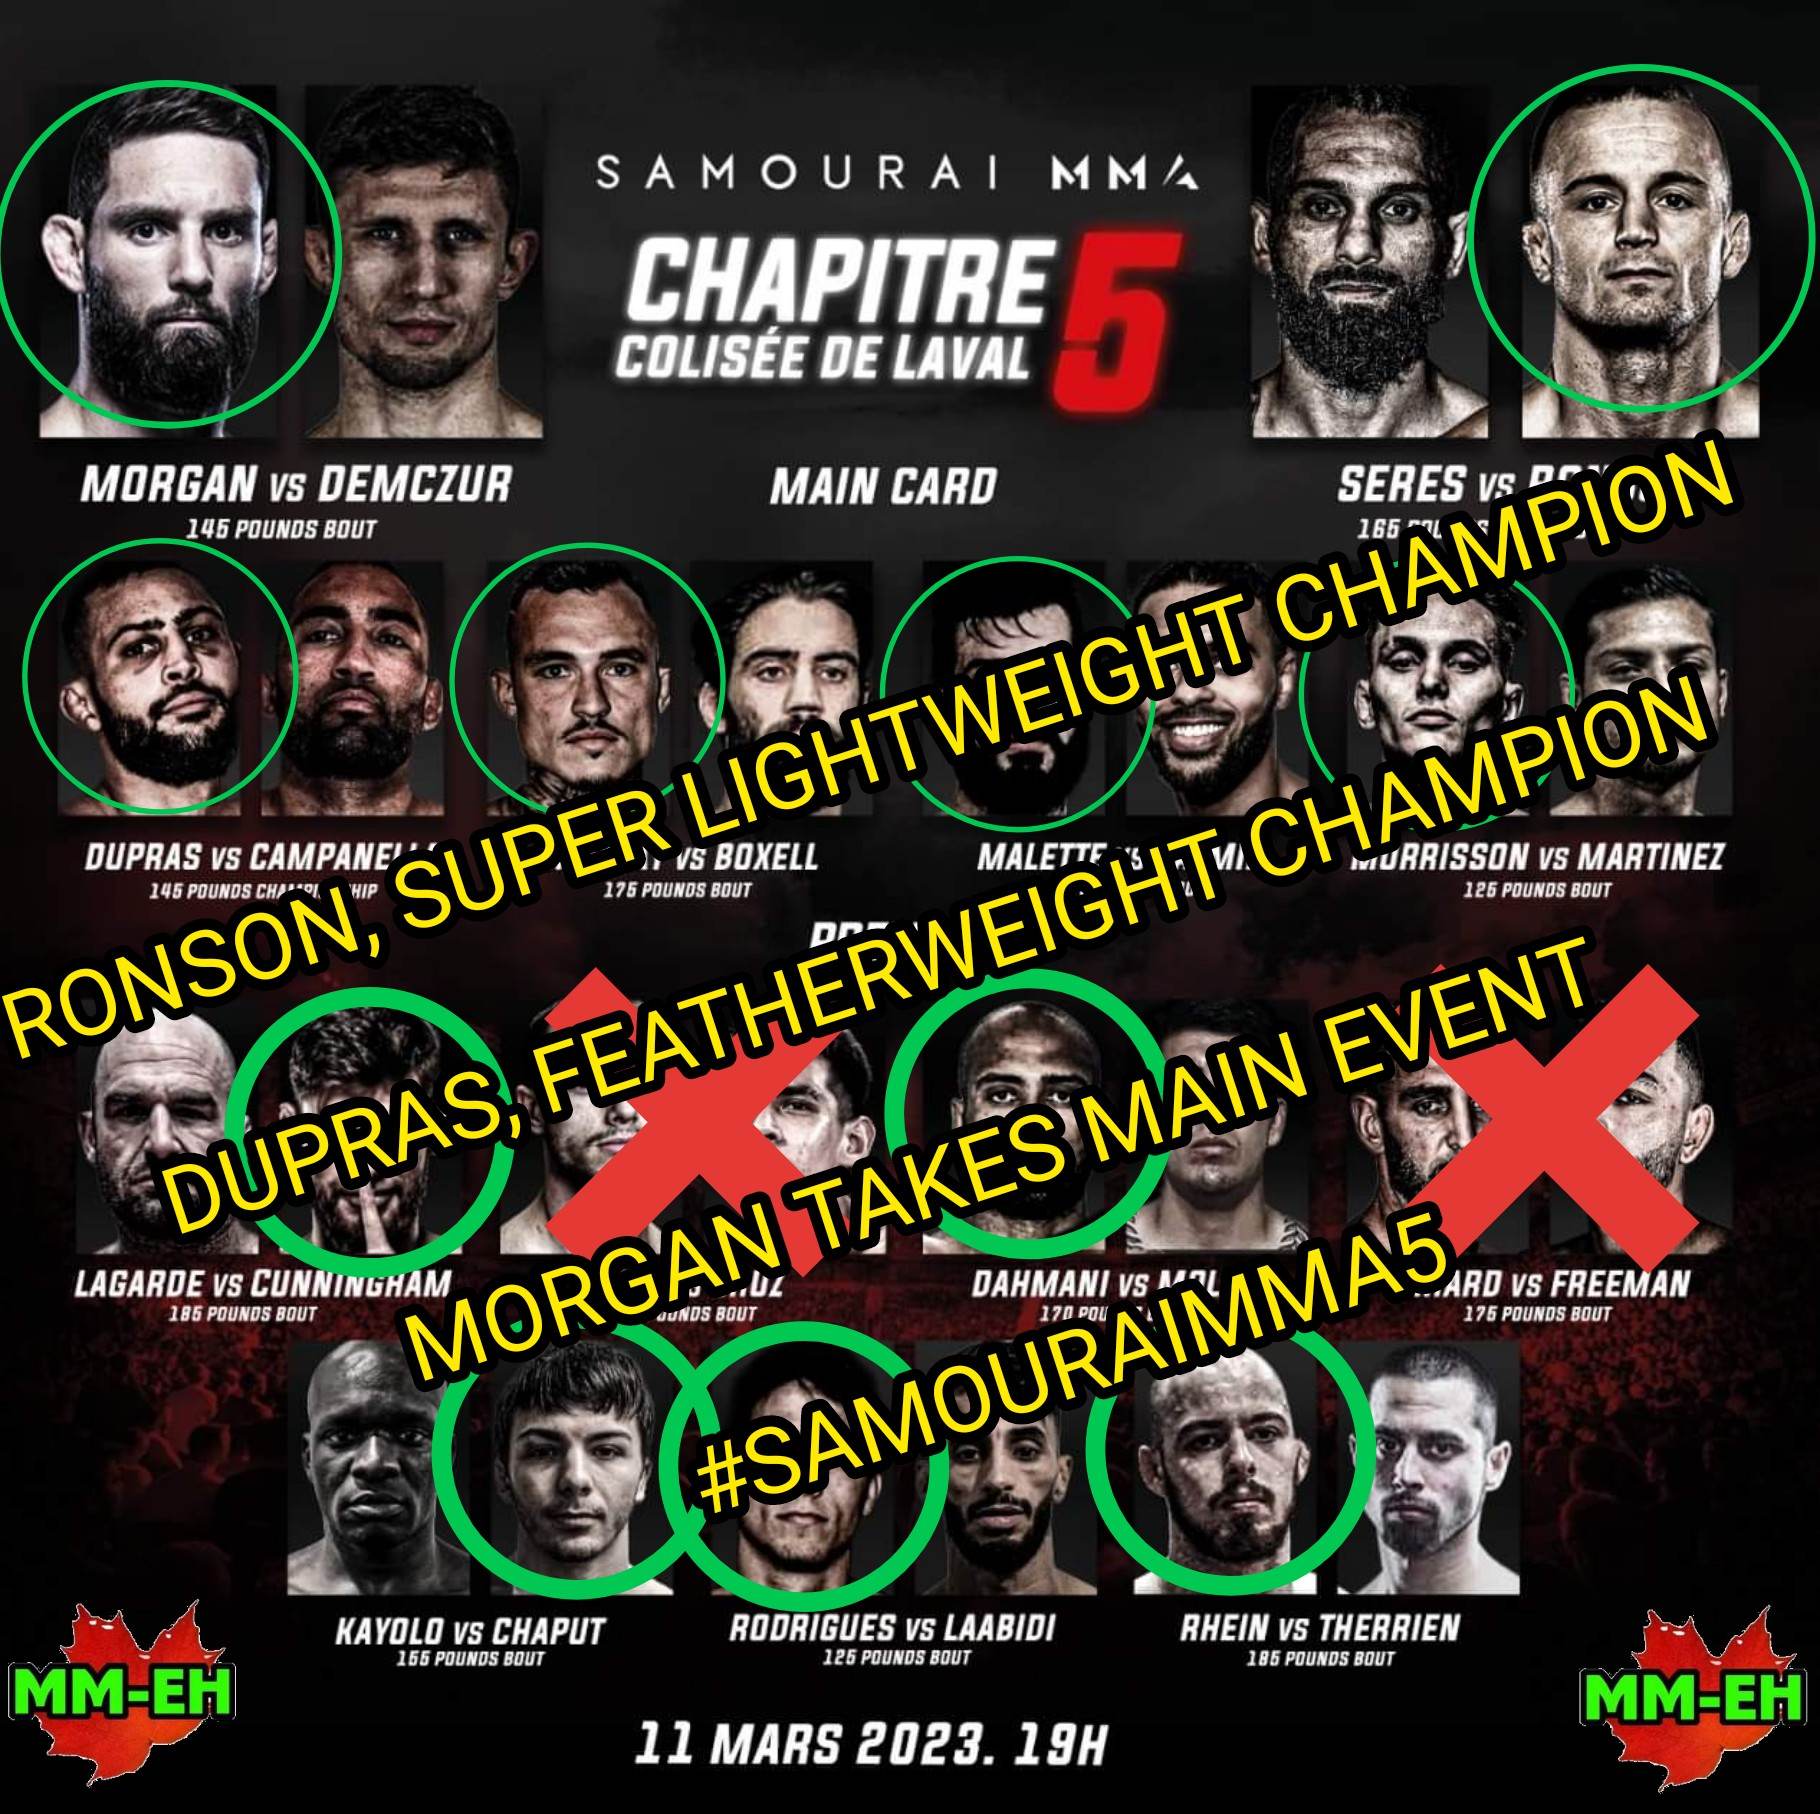 Samourai-MMA-5-Results-MM-eh